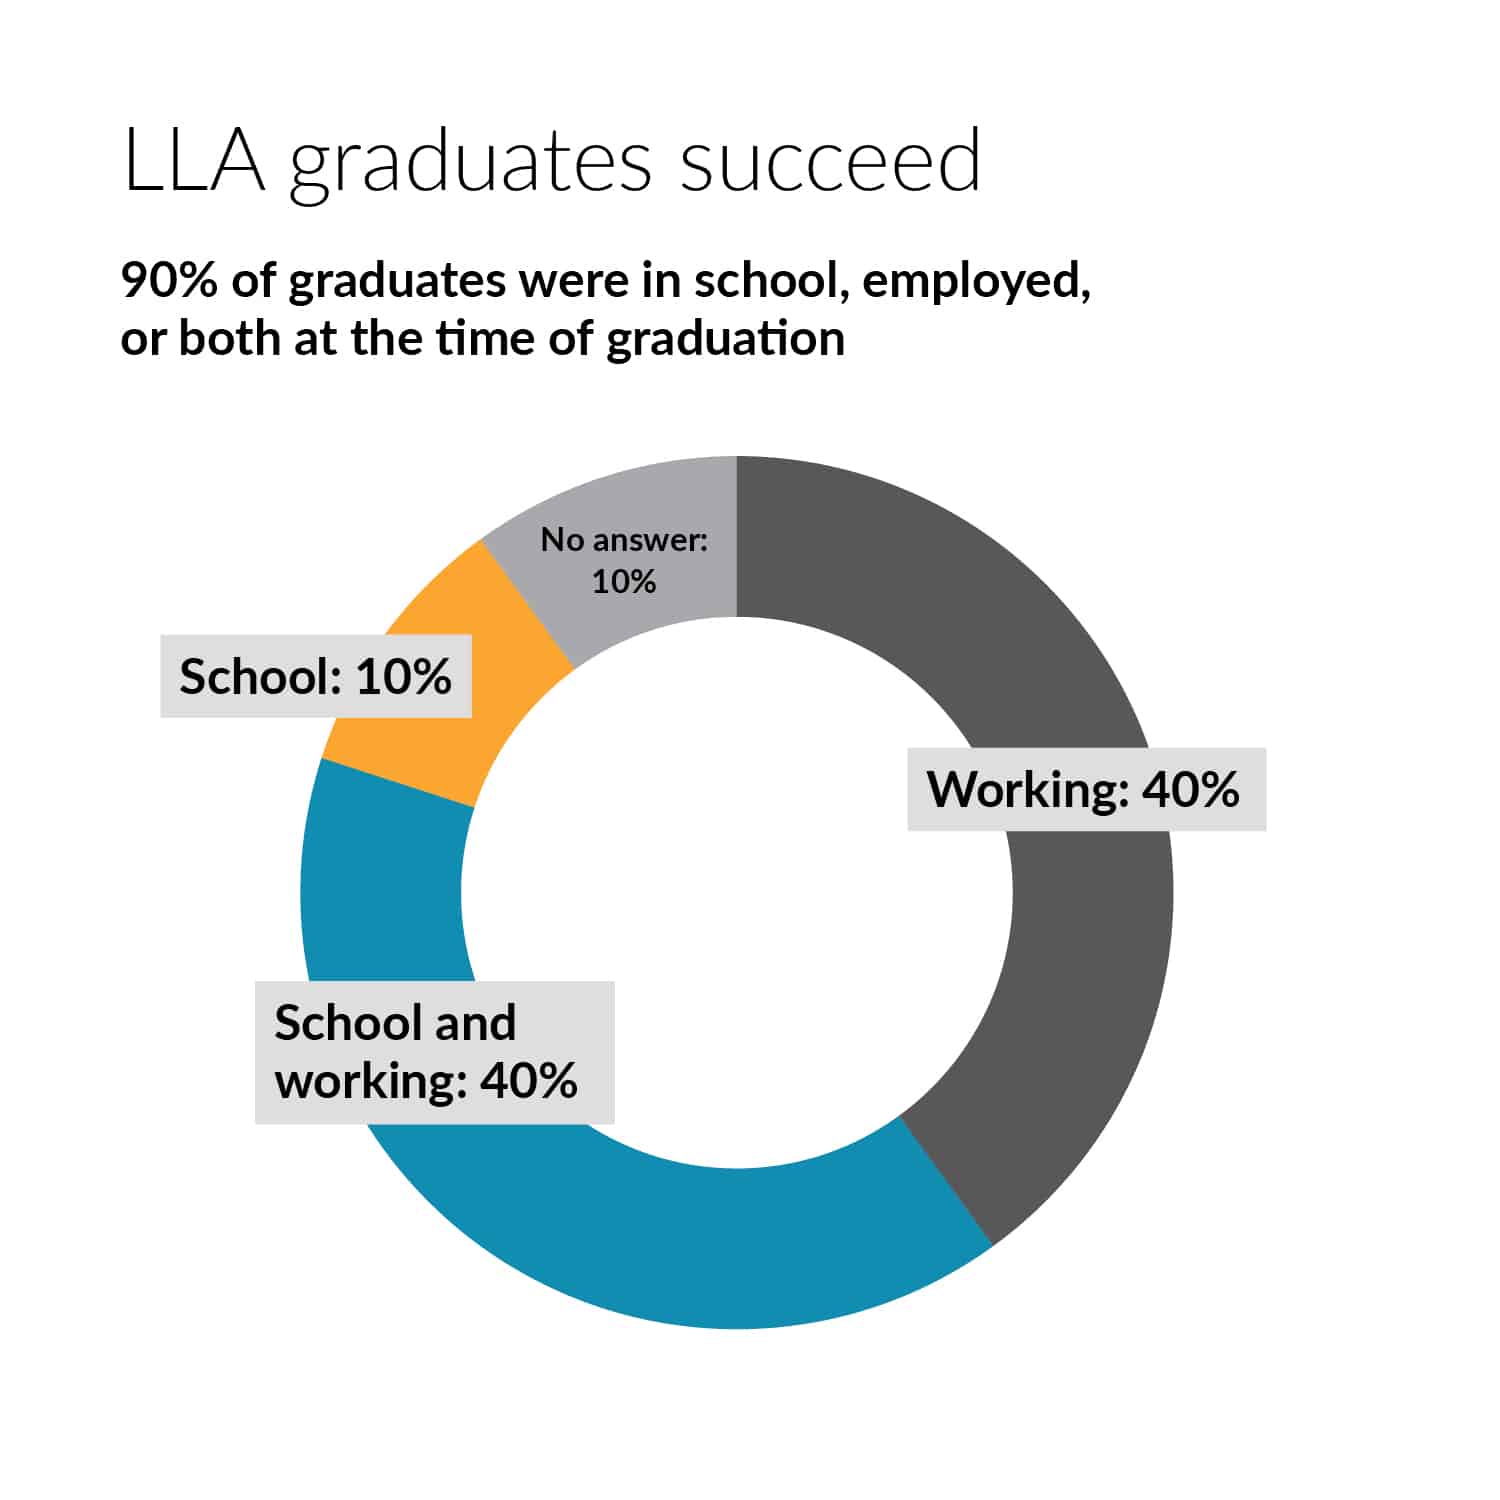 Infographic showing 90% of 2021-22 LLA graduates had post-graduating plans to be employed (40%), in school (10%), or both (40%)